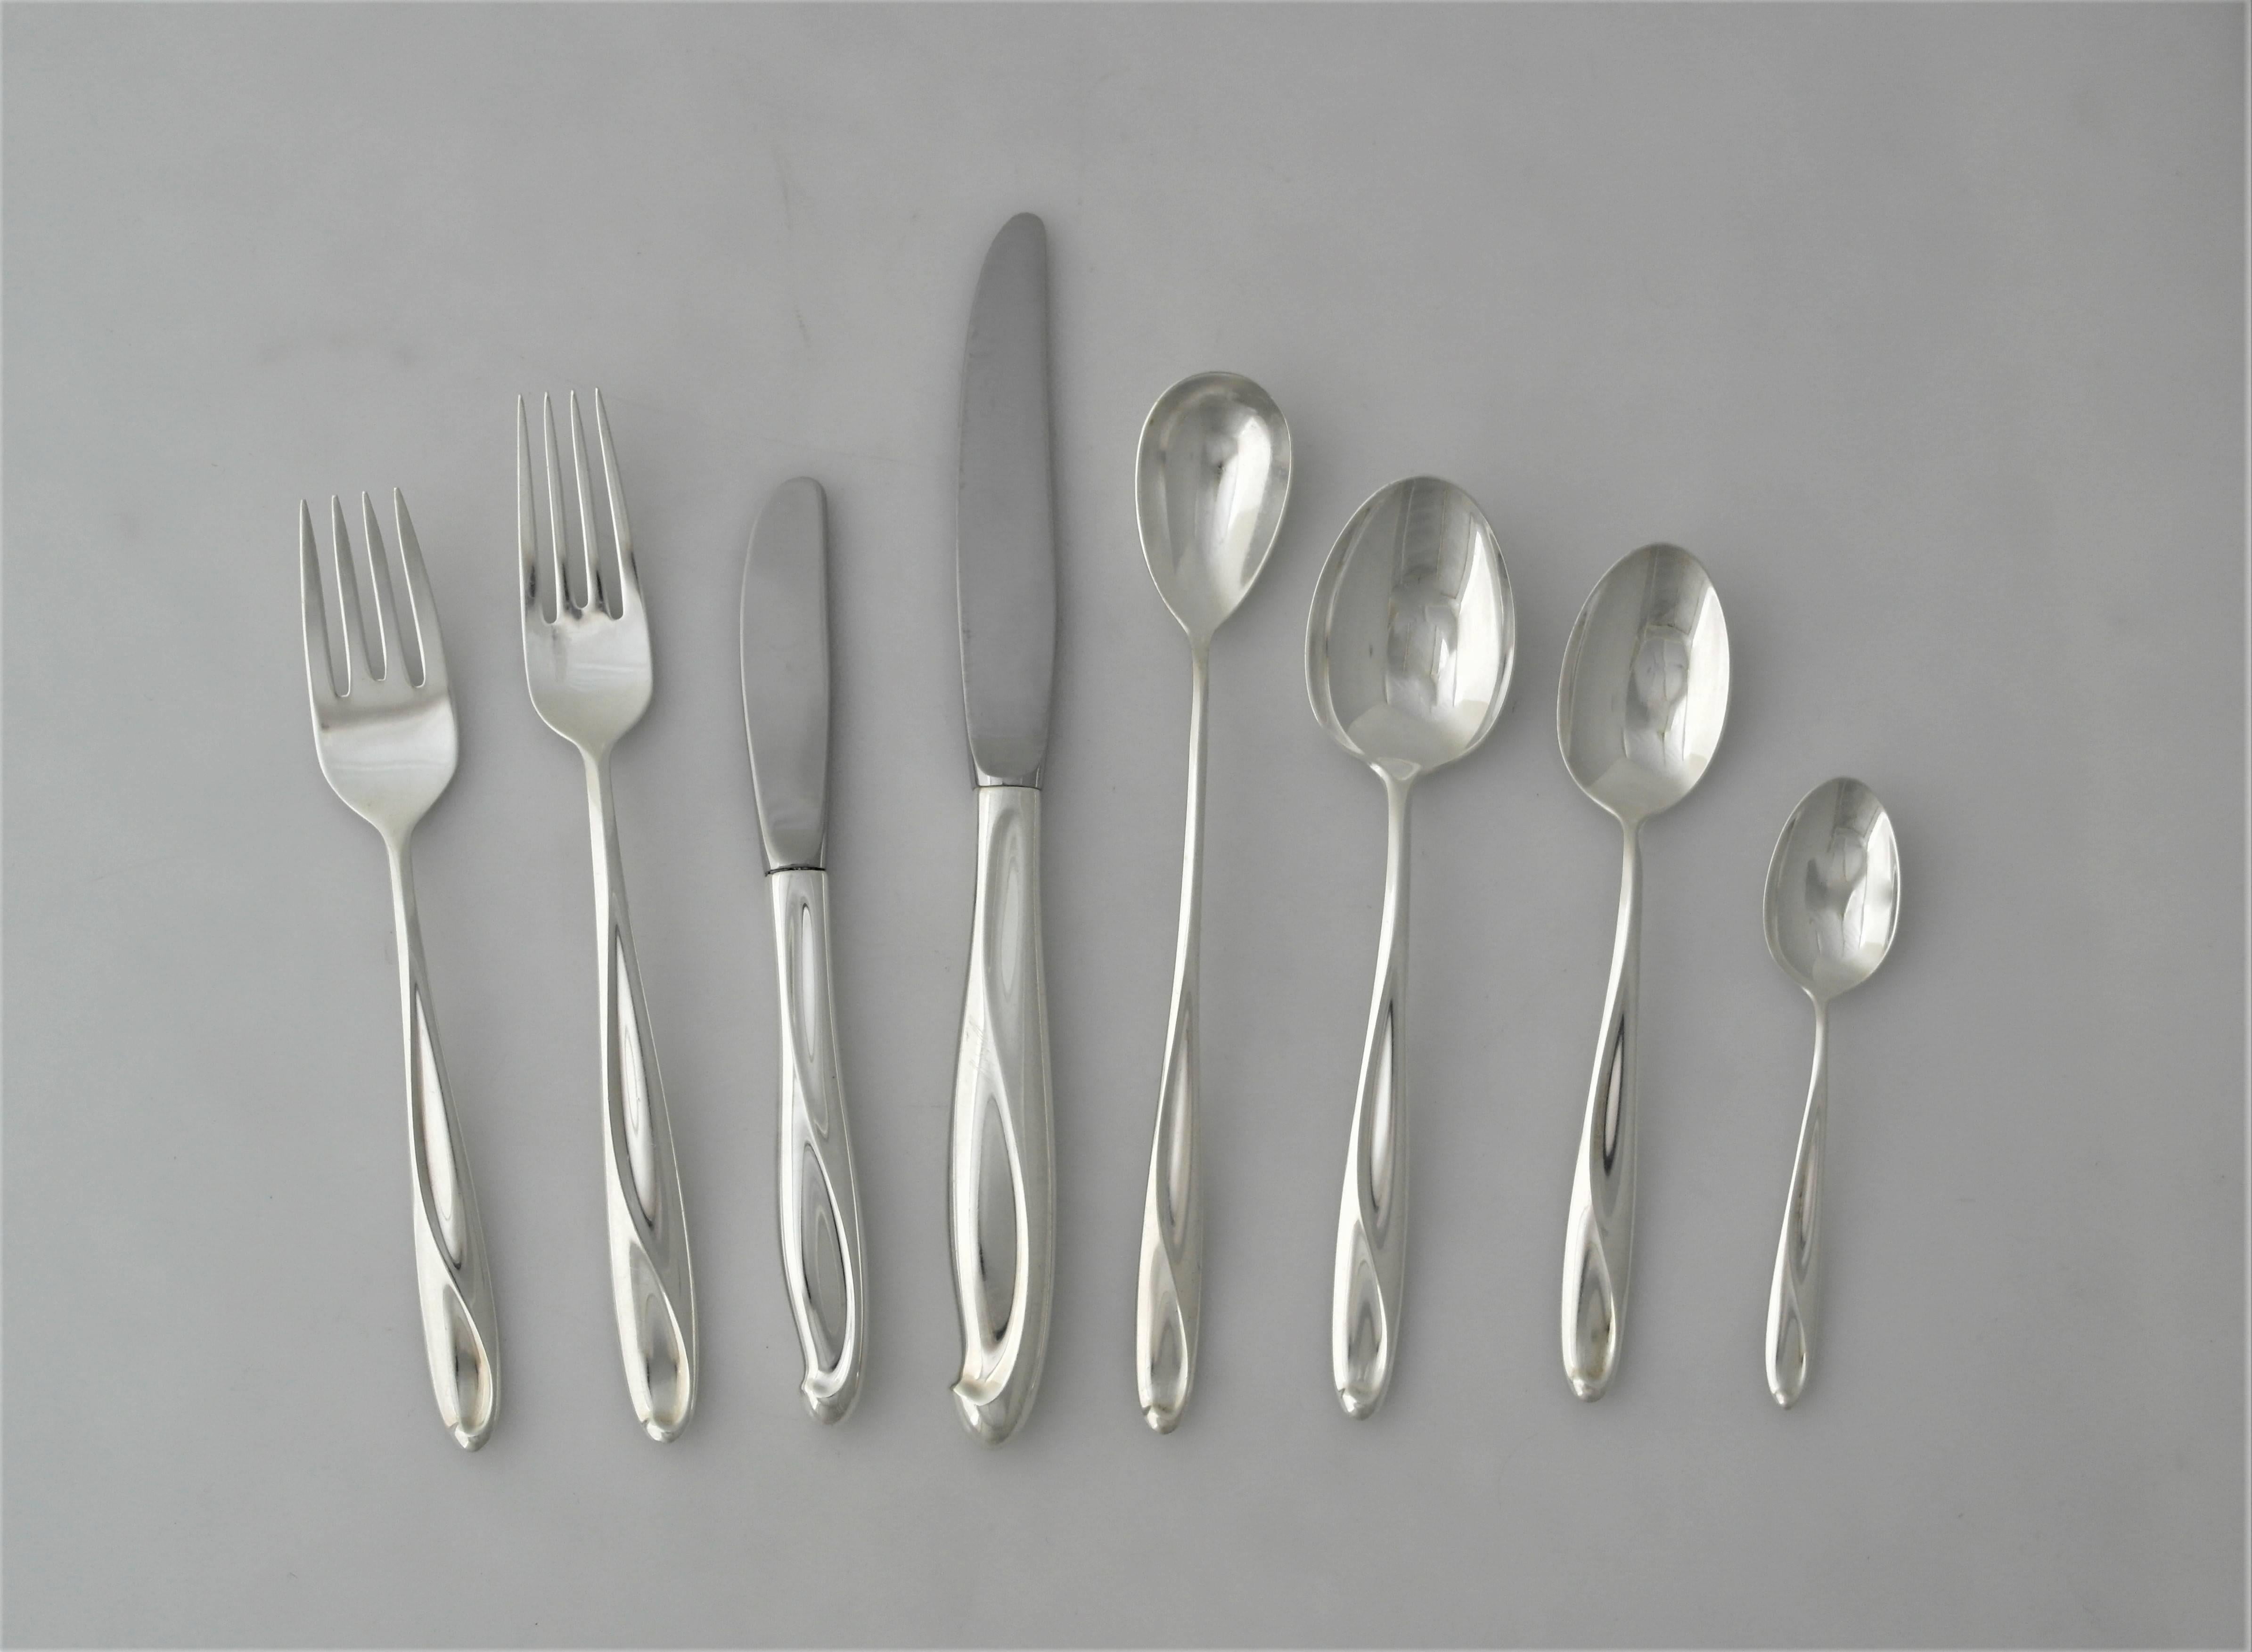 American ELSA PERETTI-LIKE Reed & Barton Sterling Silver SCULPTURE Set for 12 119 pcs For Sale